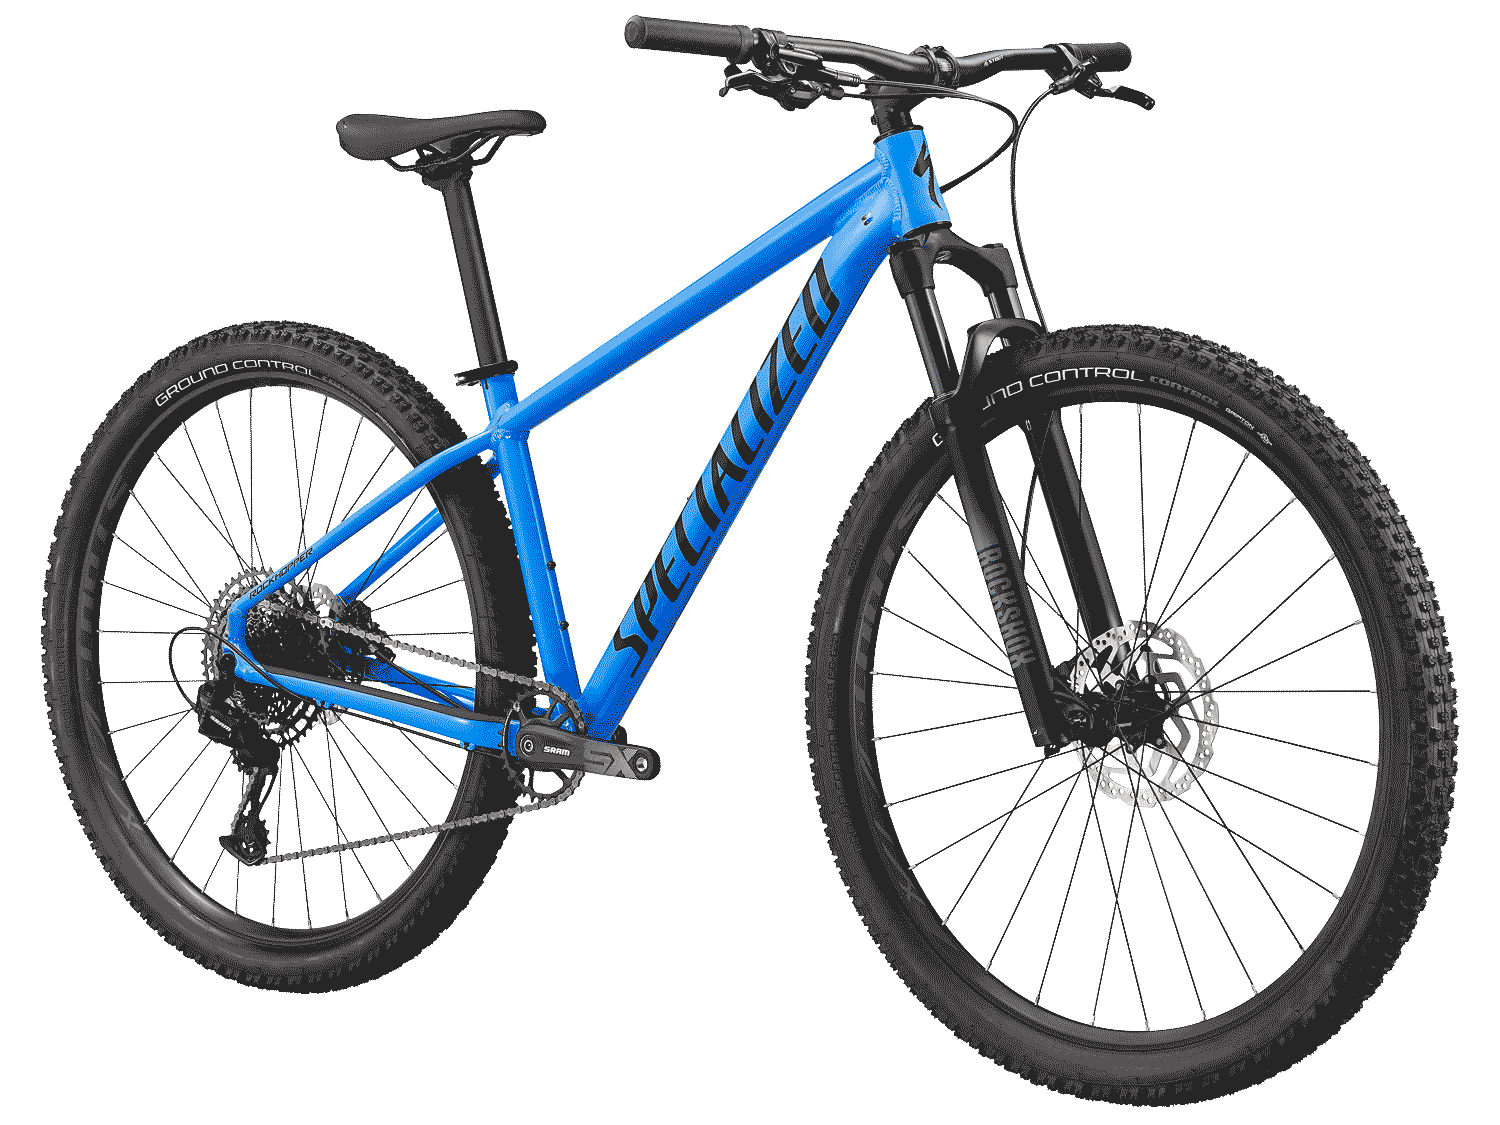 The Specialized Rockhopper